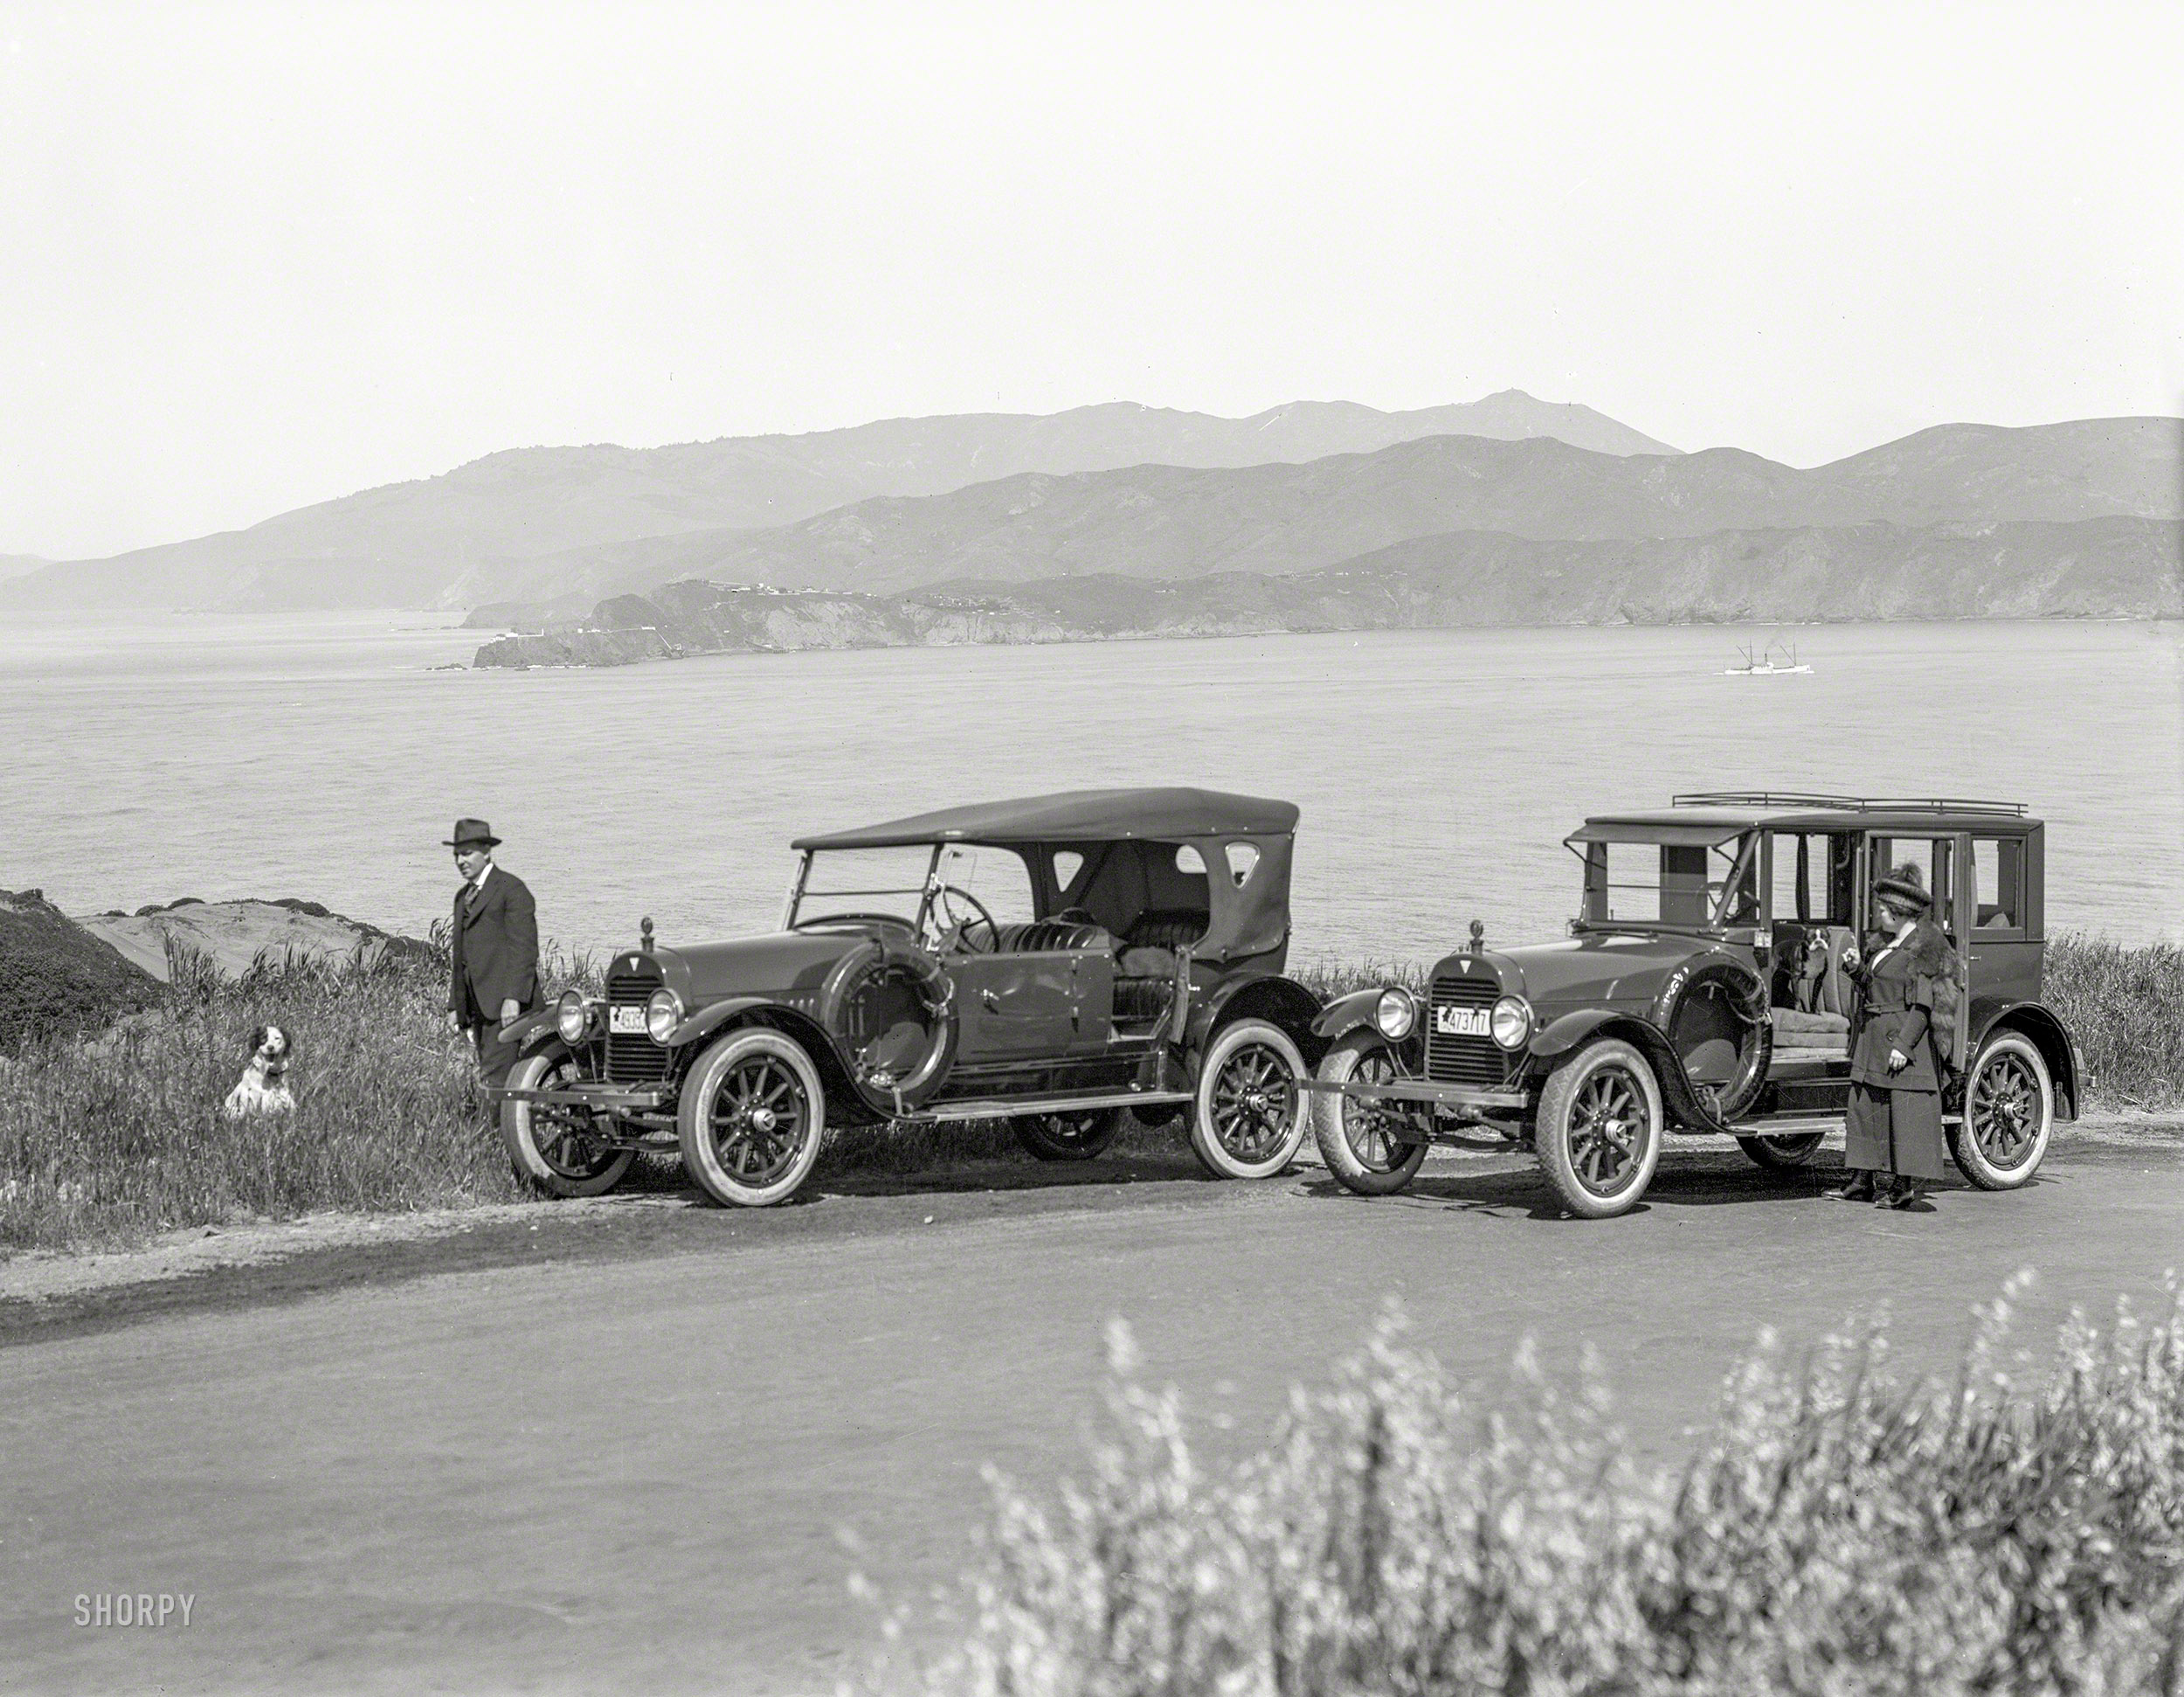 San Francisco, 1919. "Hudson autos at Land's End." Conveyances for at least four furry friends. 5x7 glass negative by Christopher Helin. View full size.